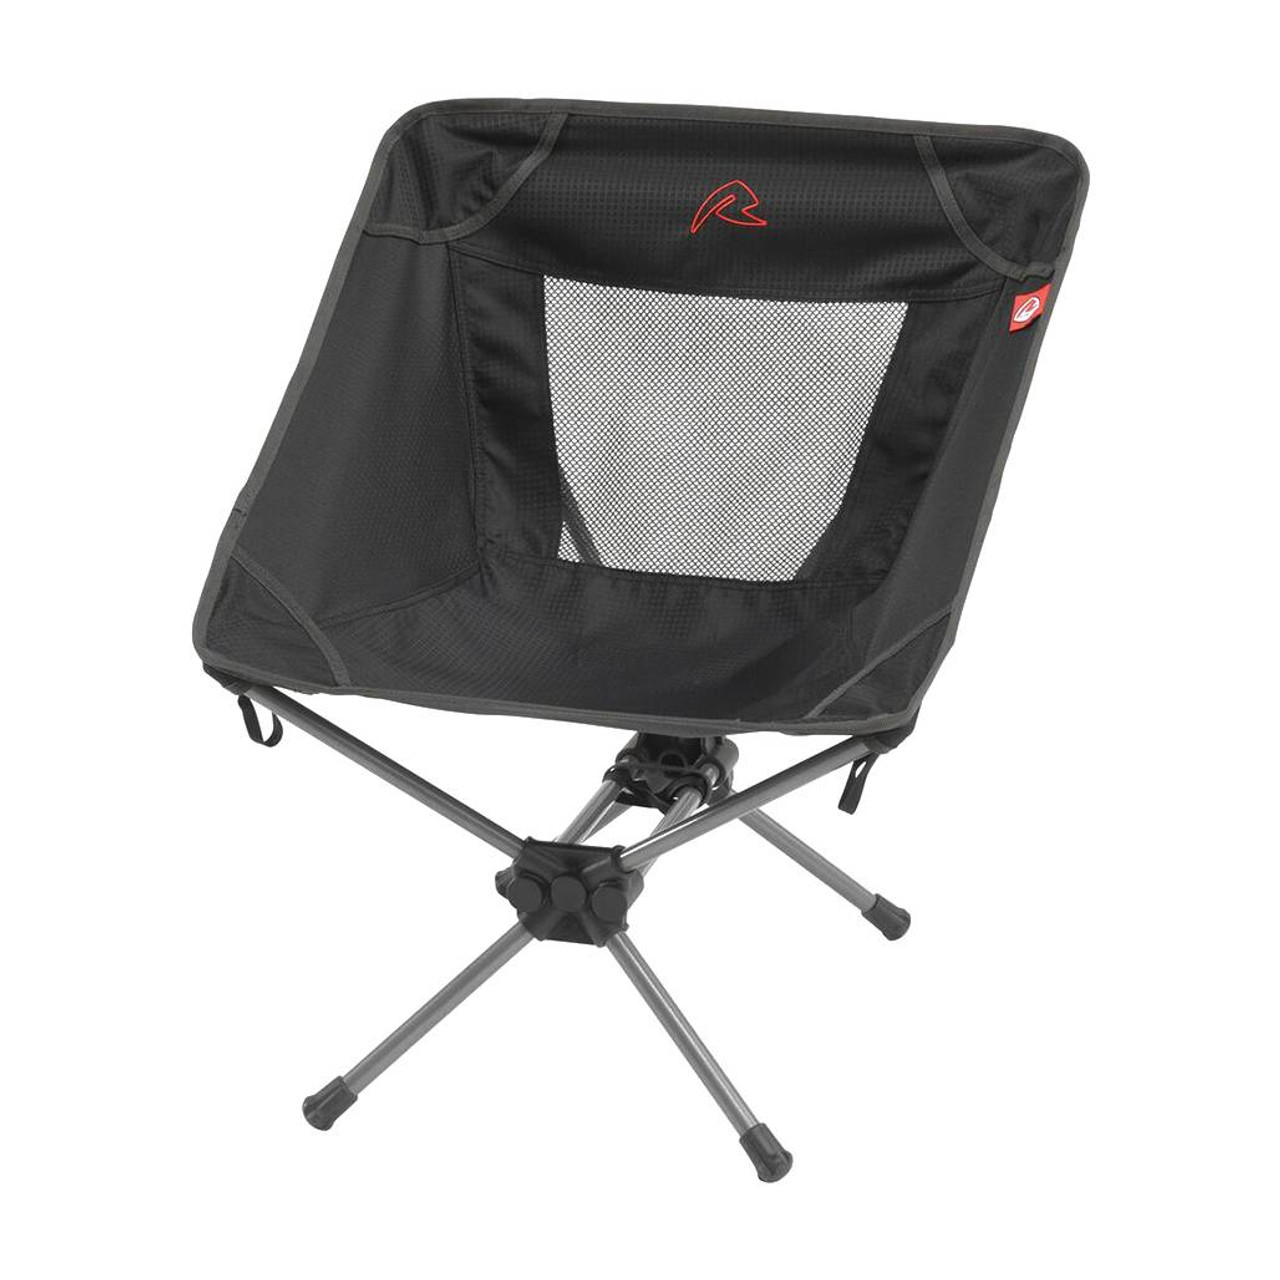 Outrider Camping Chair